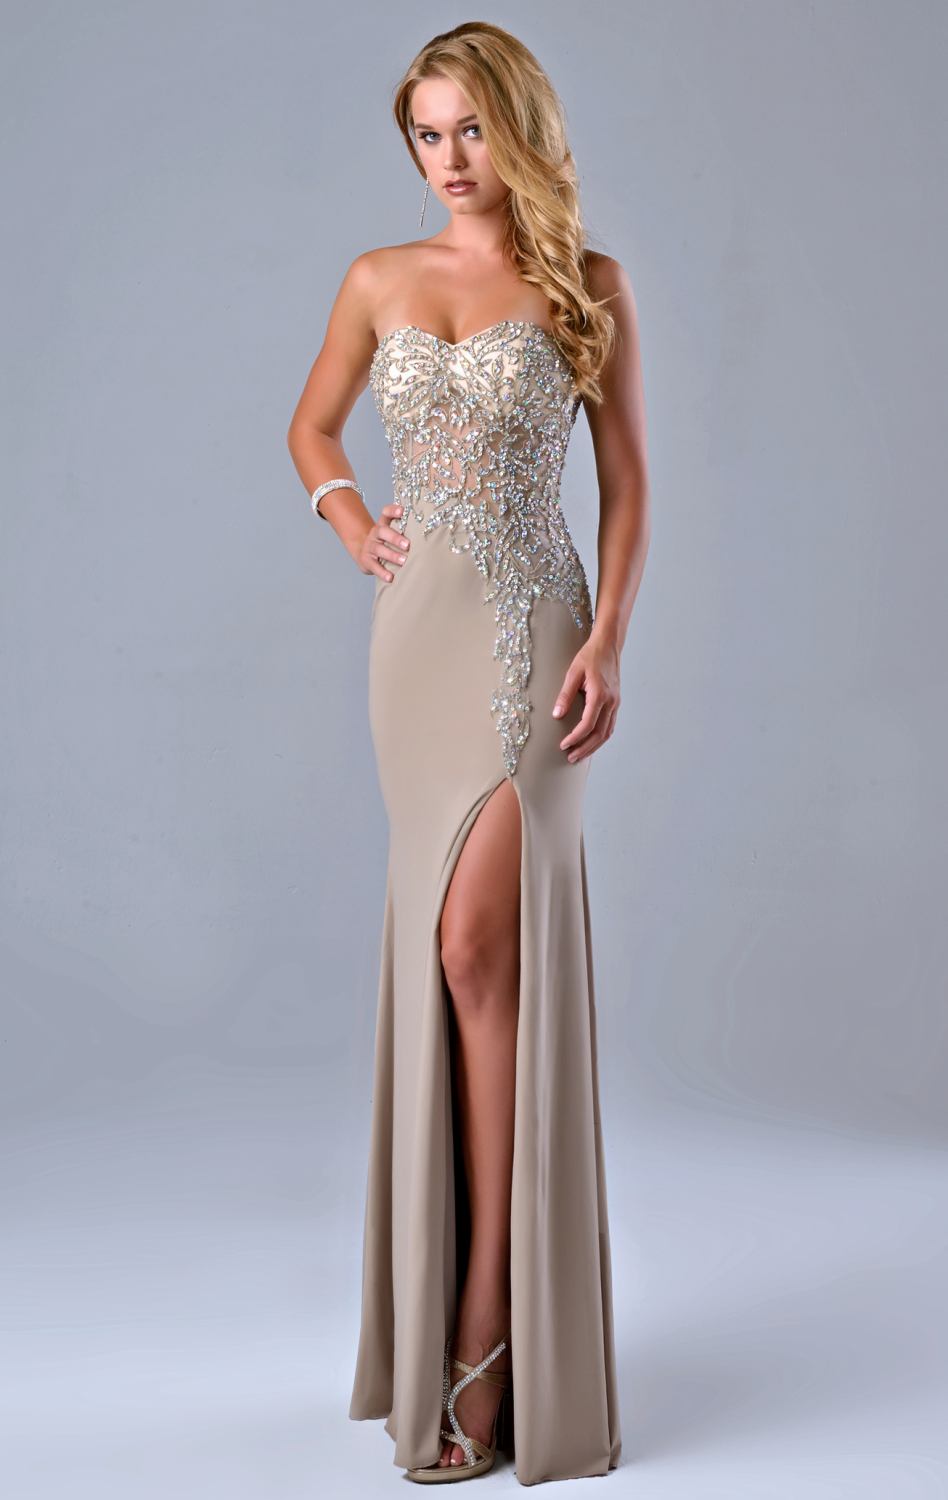 Gown 4 